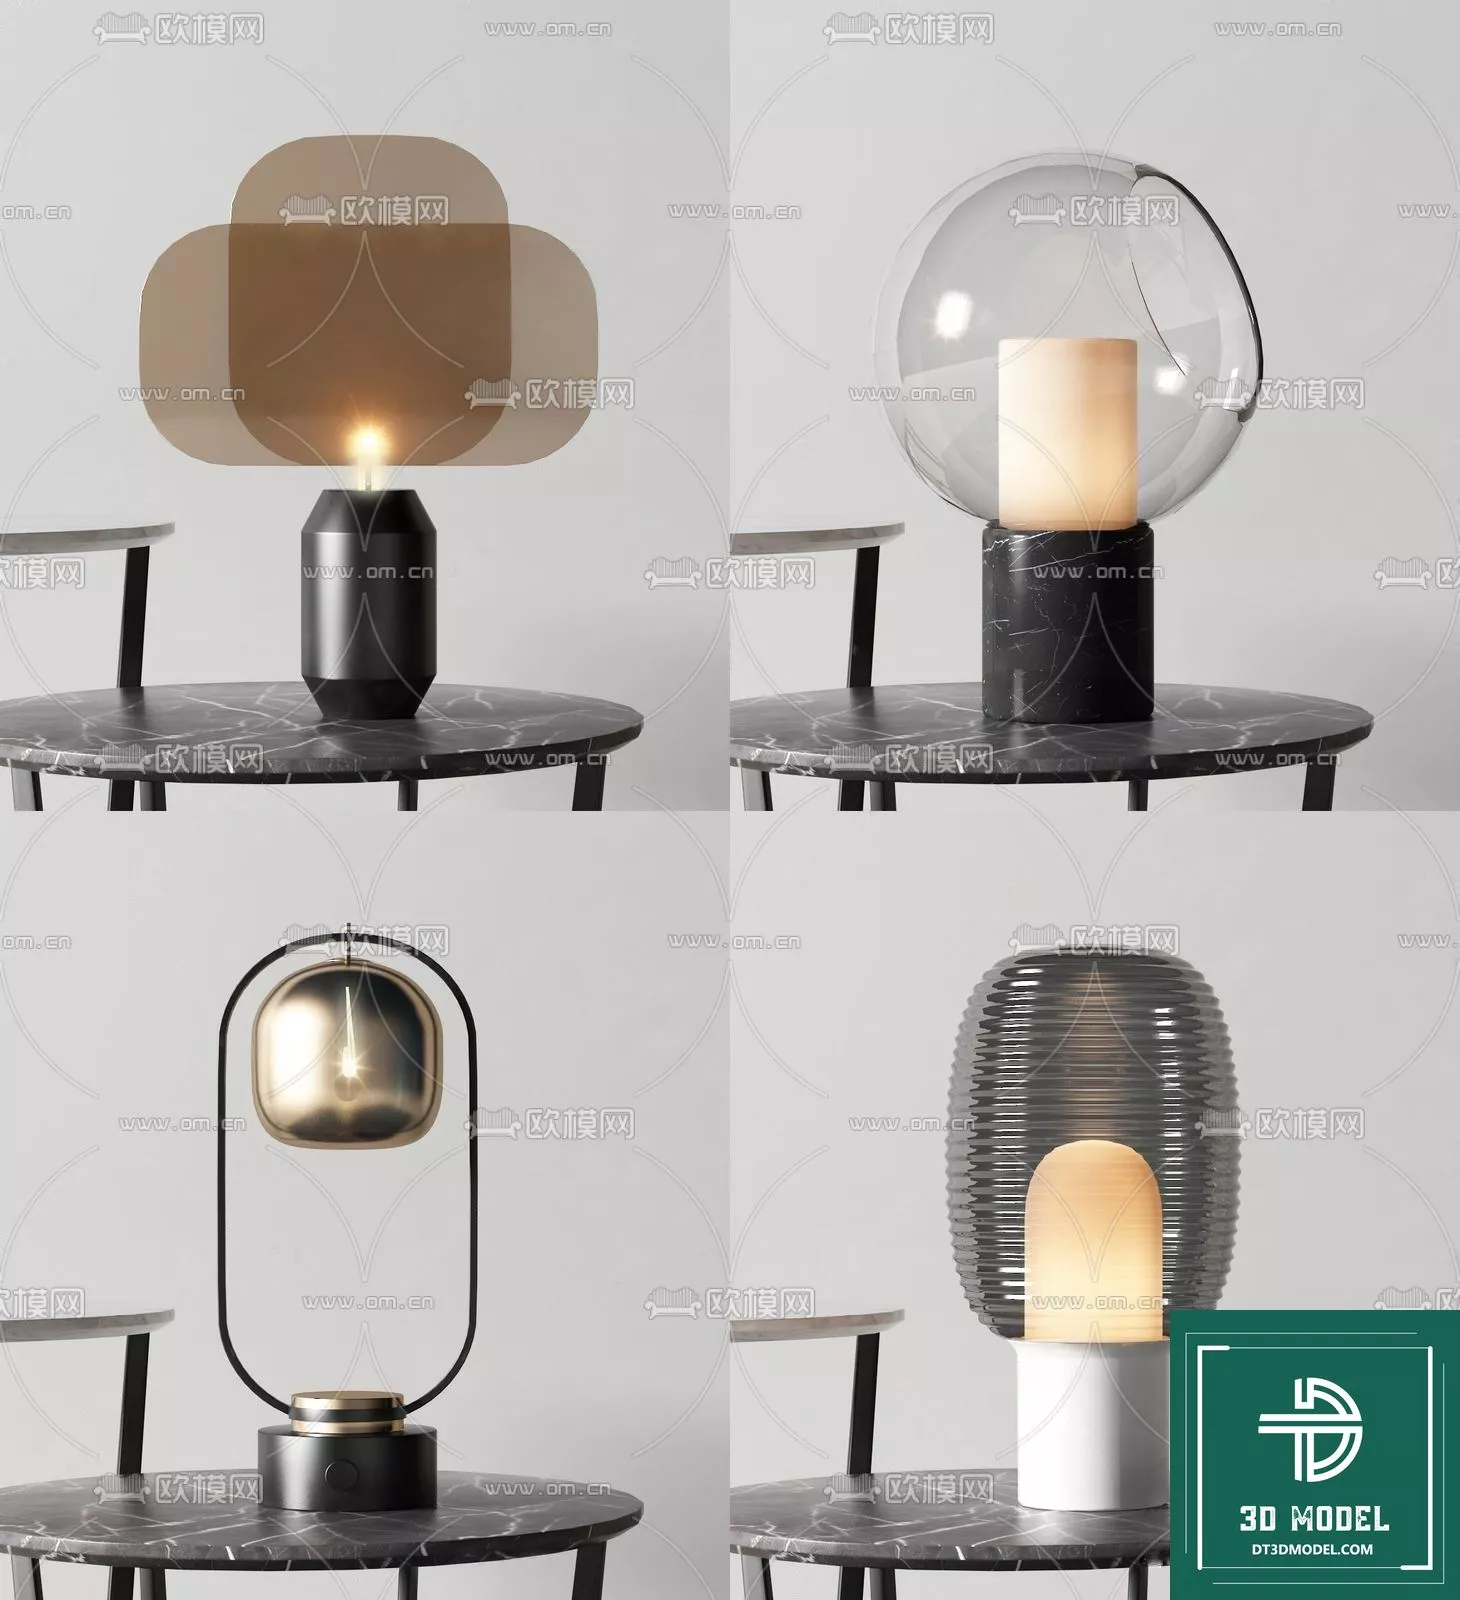 MODERN TABLE LAMP - SKETCHUP 3D MODEL - VRAY OR ENSCAPE - ID14538